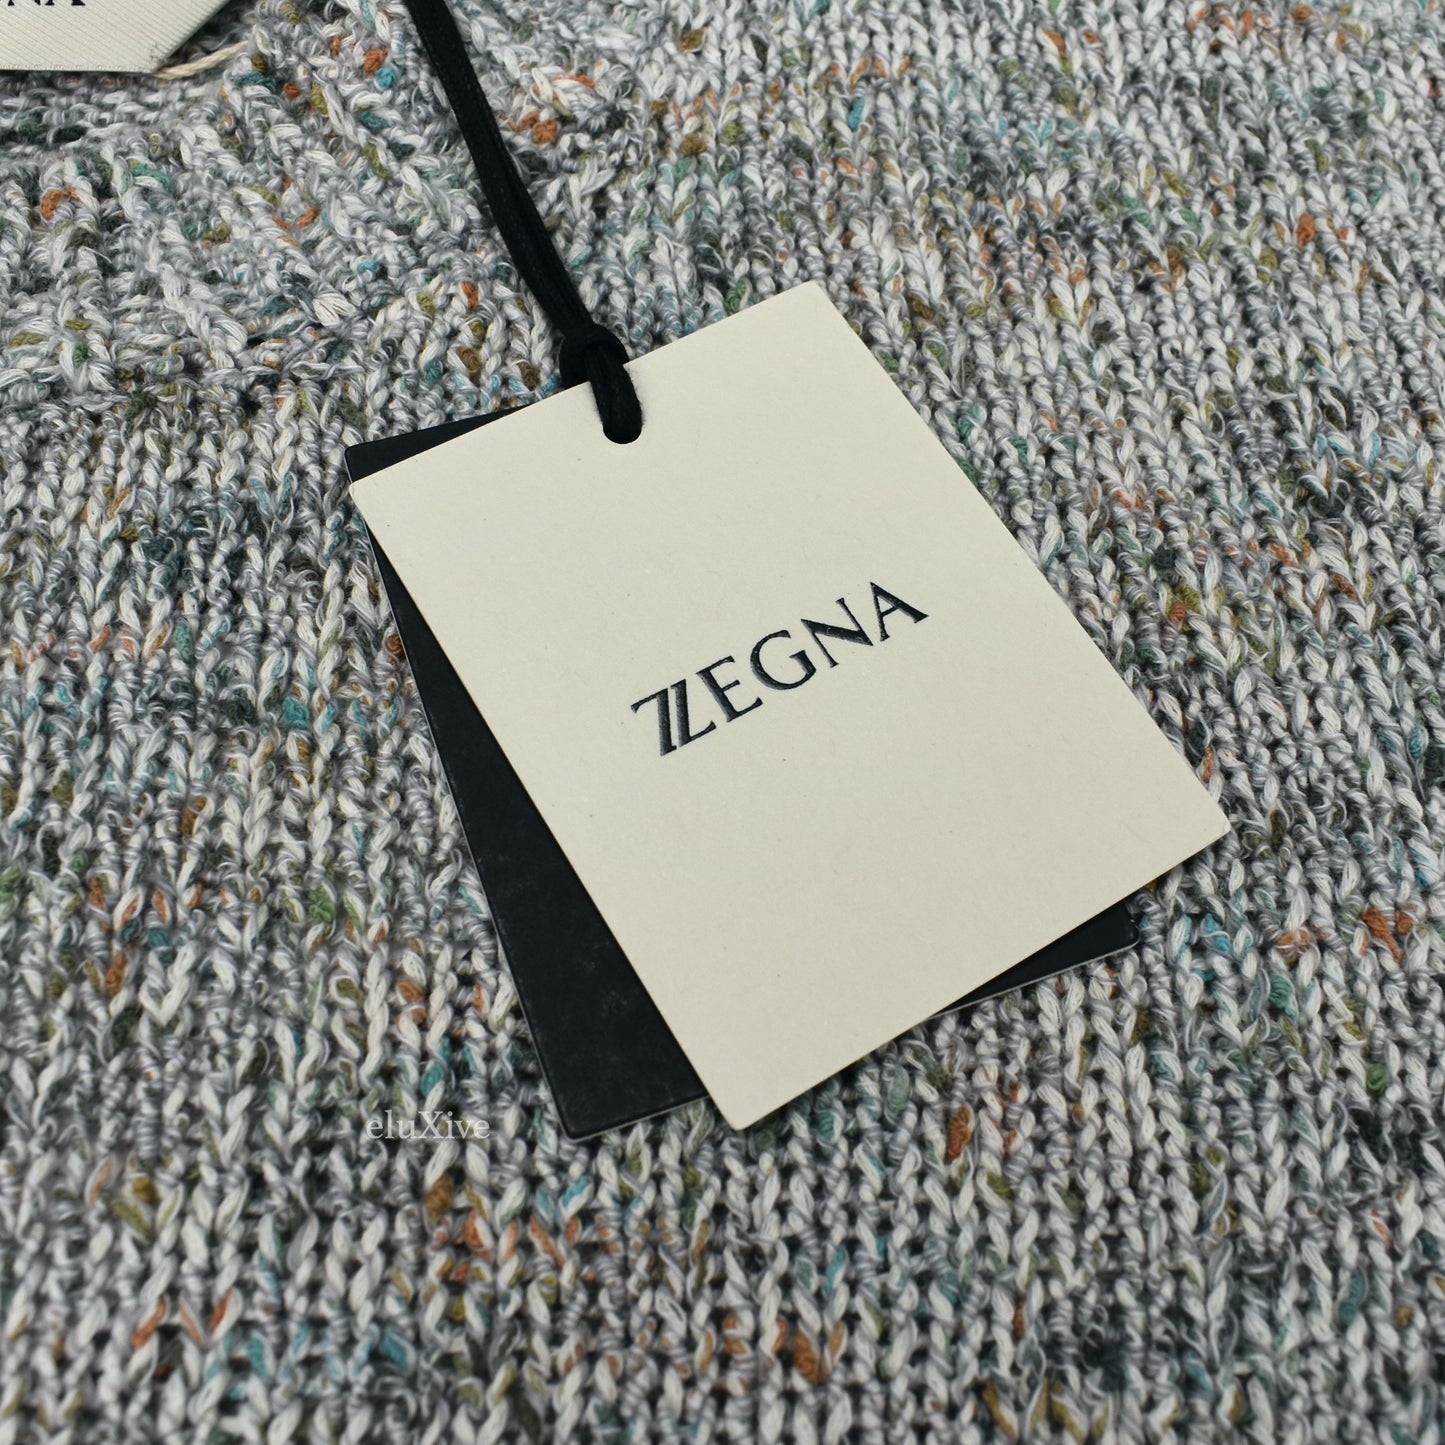 Z Zegna - Gray Color Speckled Cotton Sweater